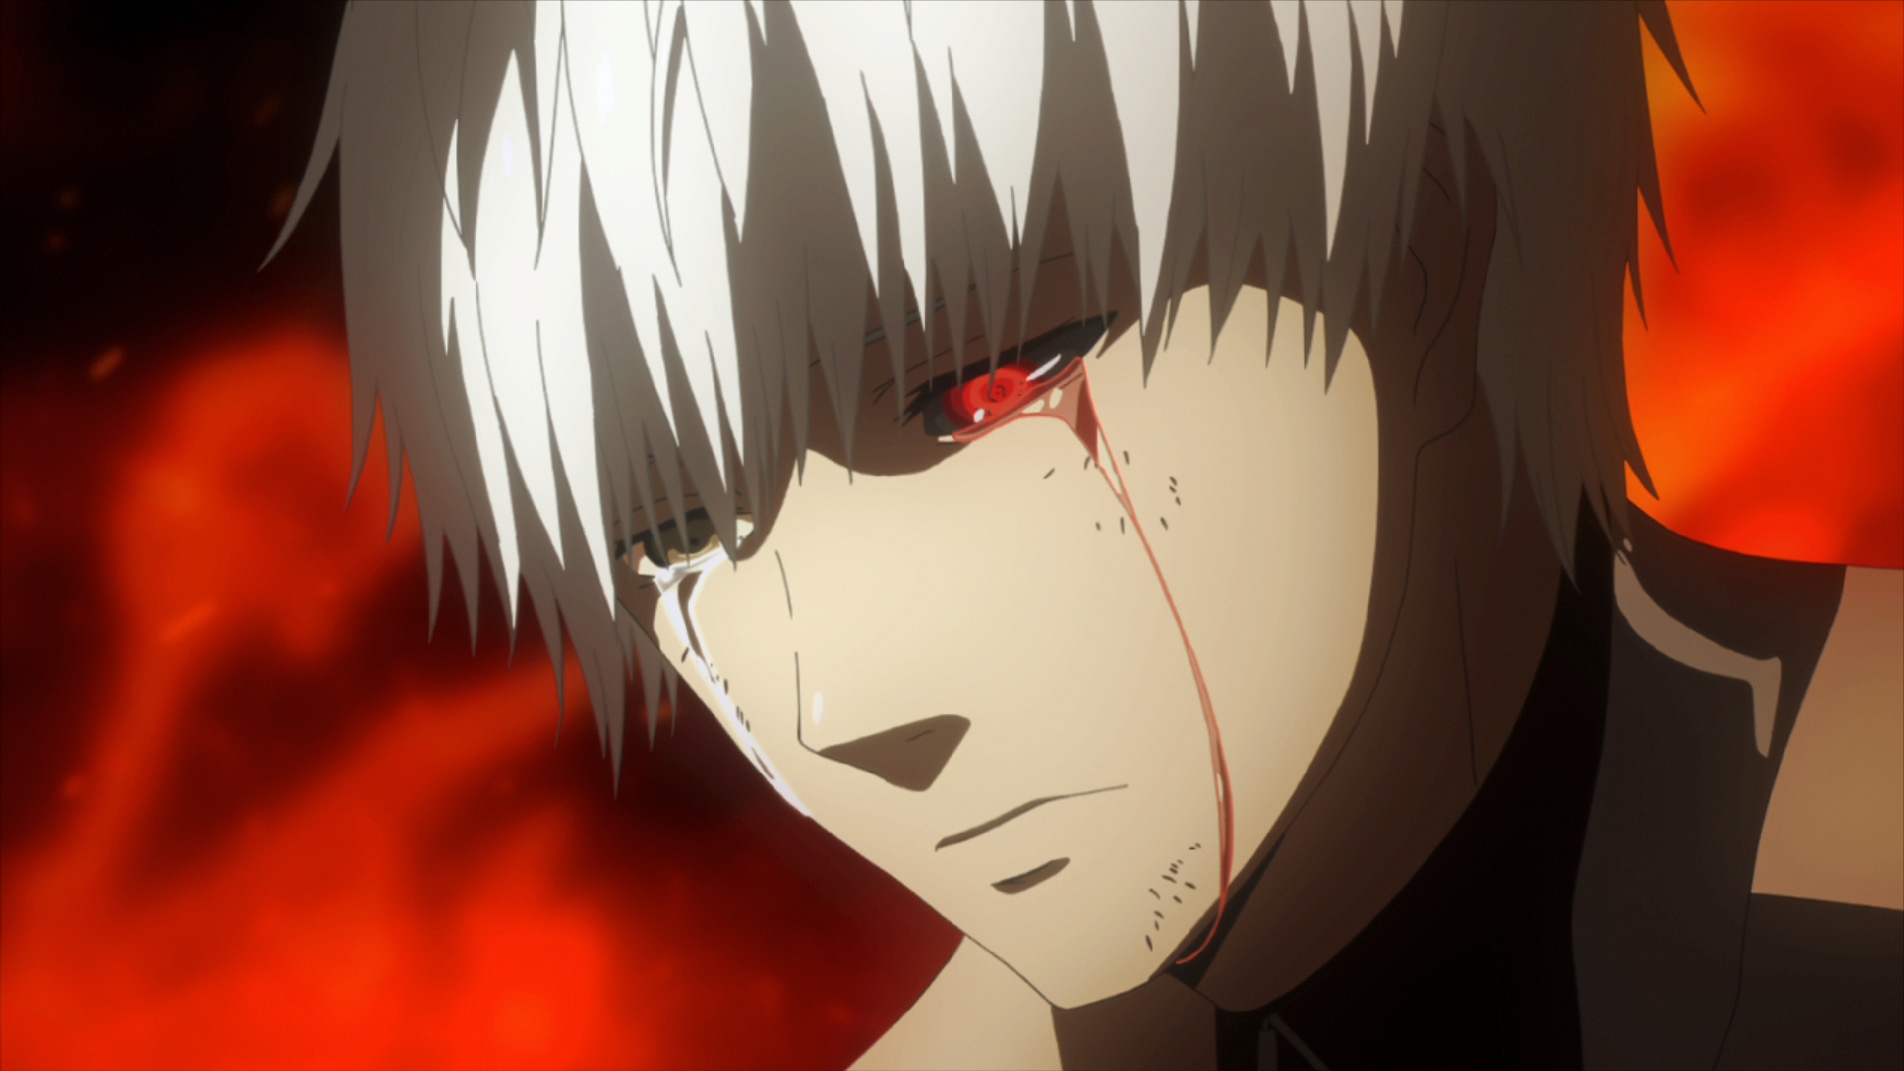 Tokyo Ghoul Season 2 Episode 1 Dubbed / His naivete survives most of